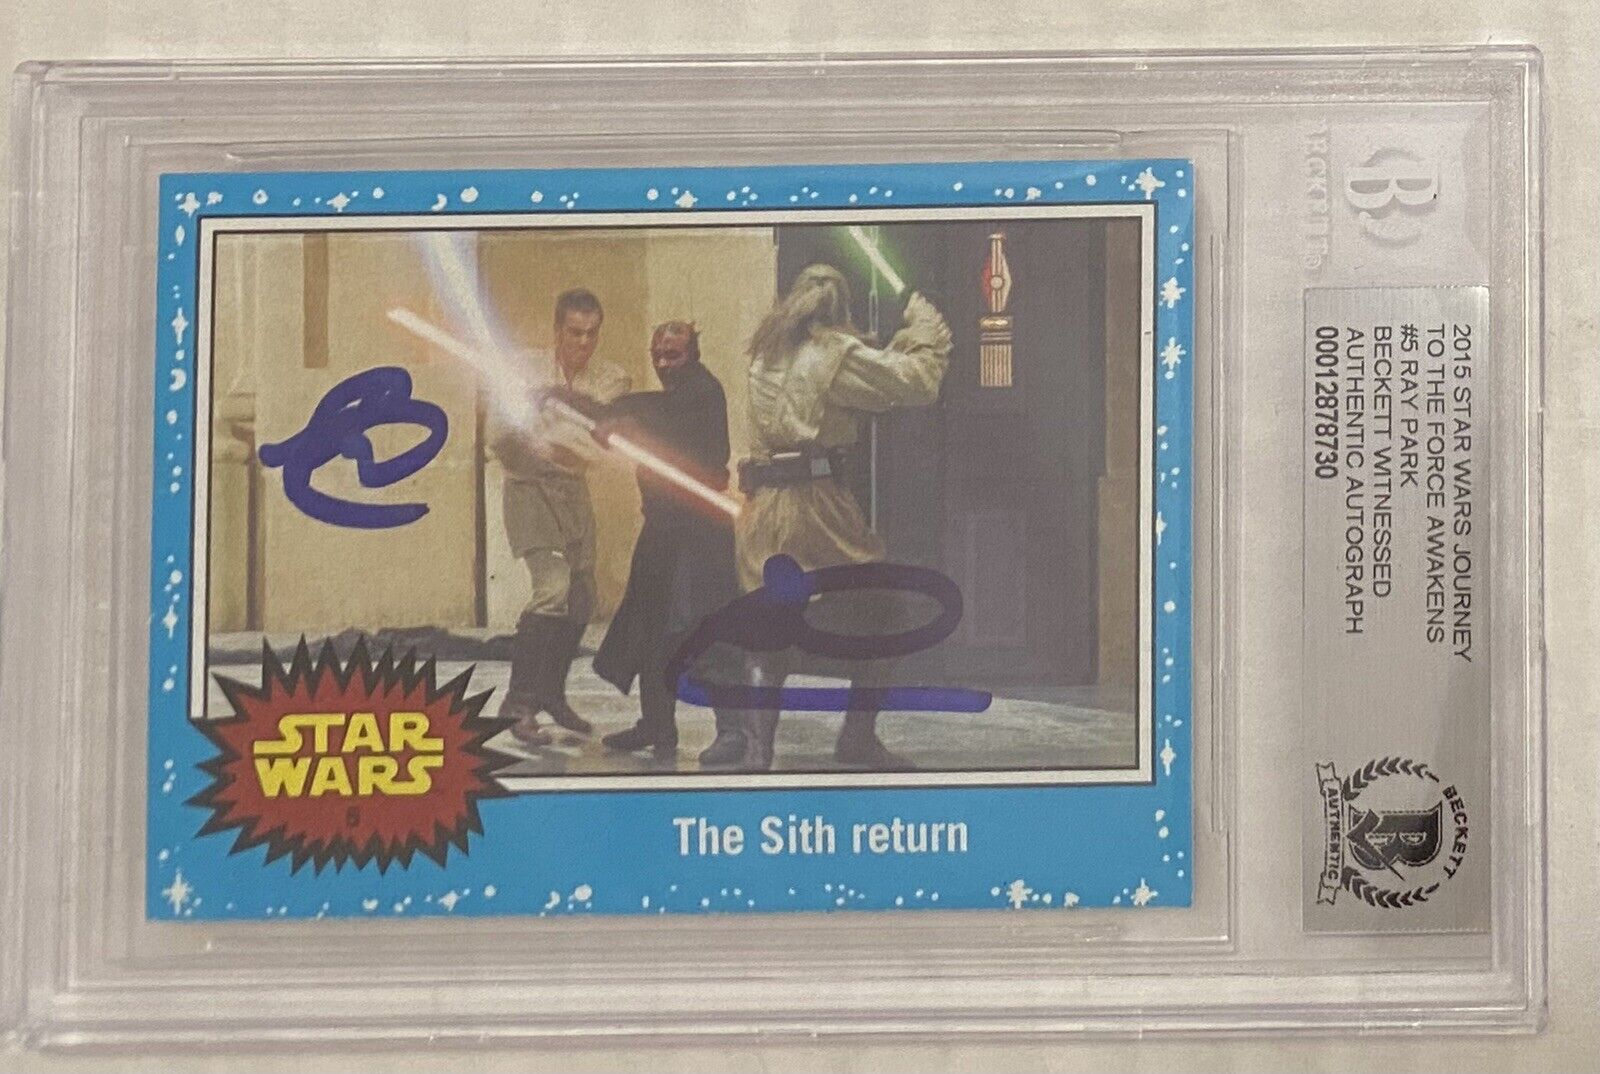 RAY PARK STAR WARS SIGNED TOPPS CARD BECKETT SLABBED BAS CERTIFIED. DARTH MAUL